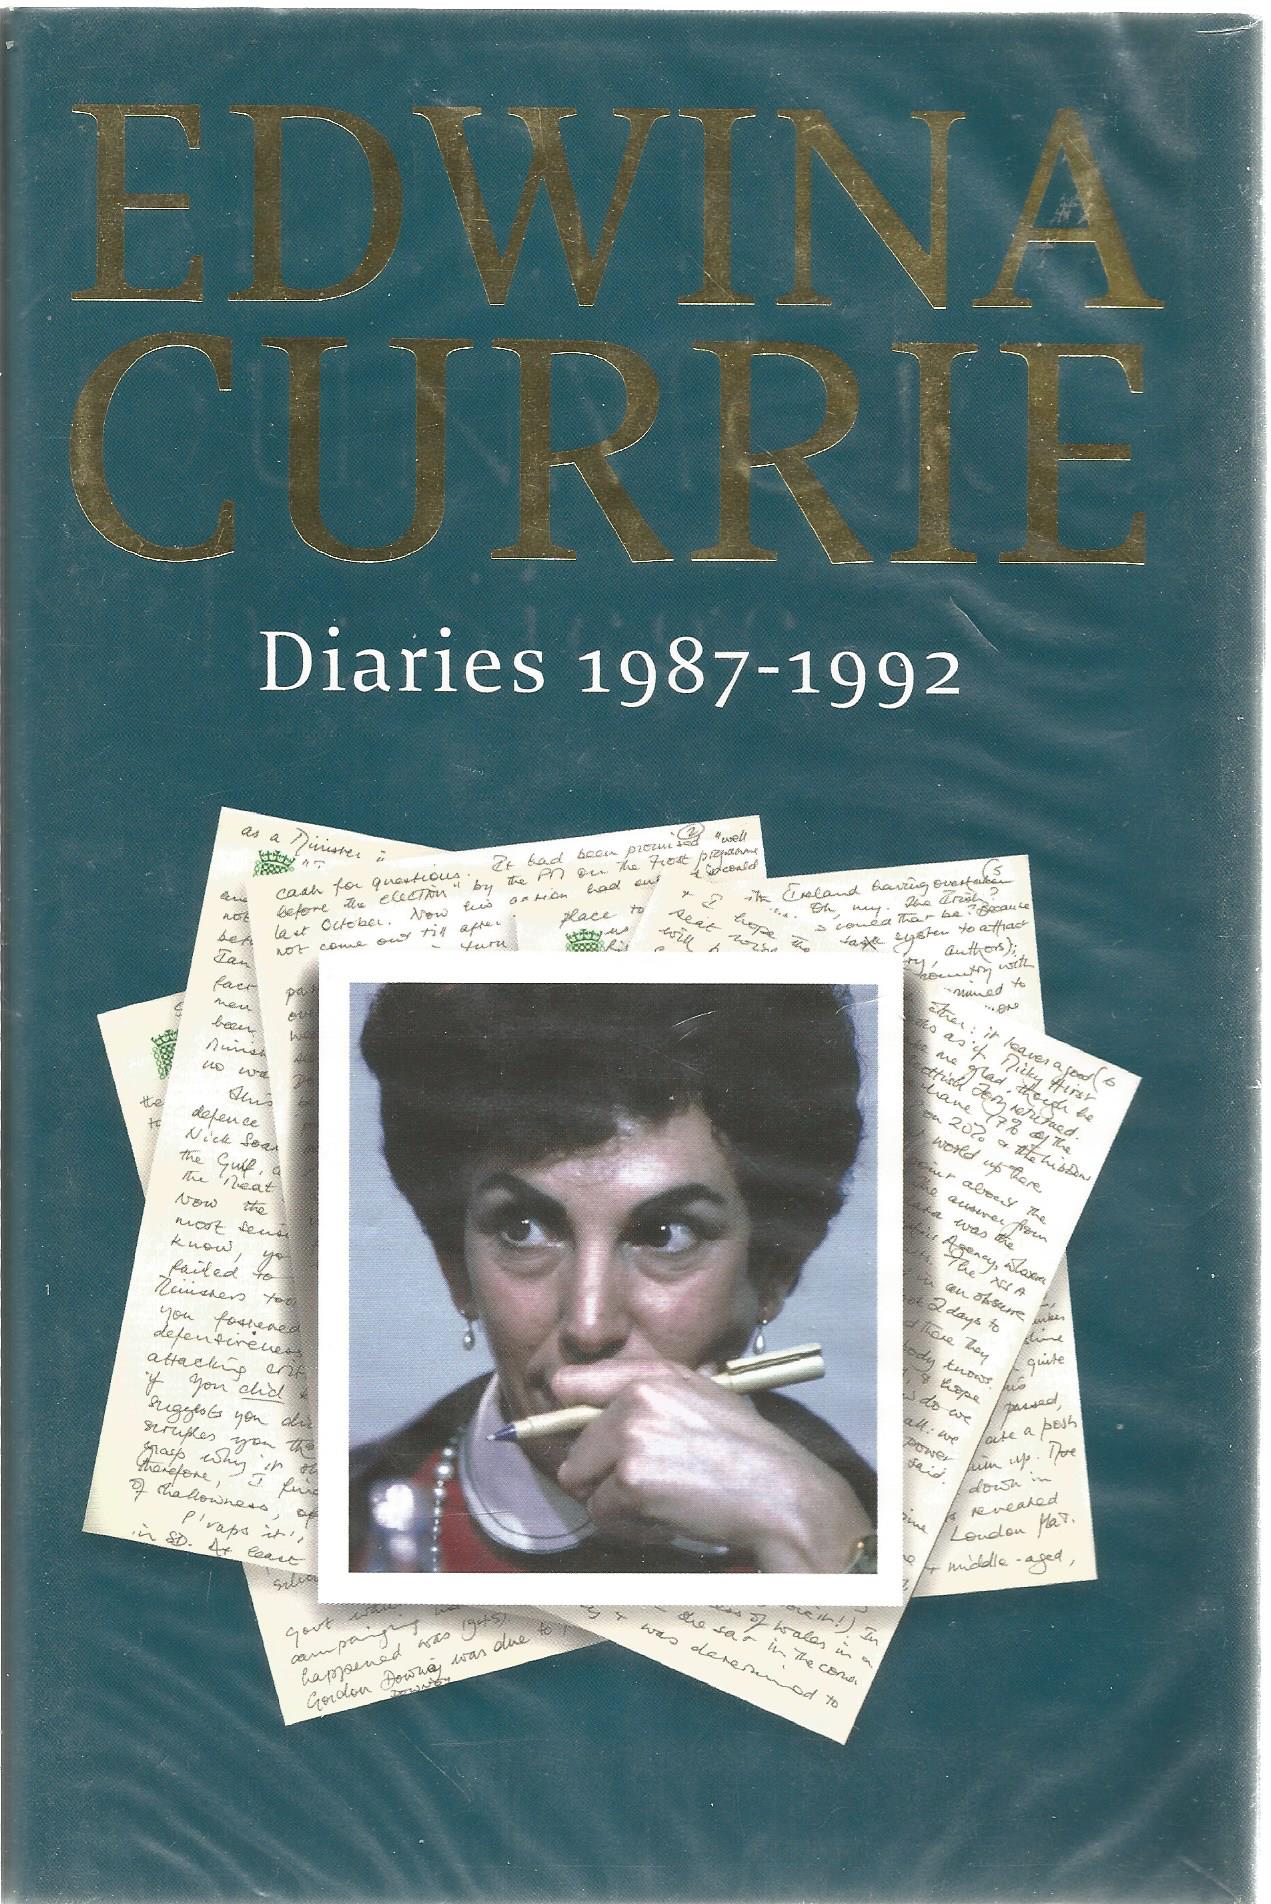 Edwina Currie signed hard back book of her diaries from 1987 - 1992. Signed on title page - Image 2 of 3